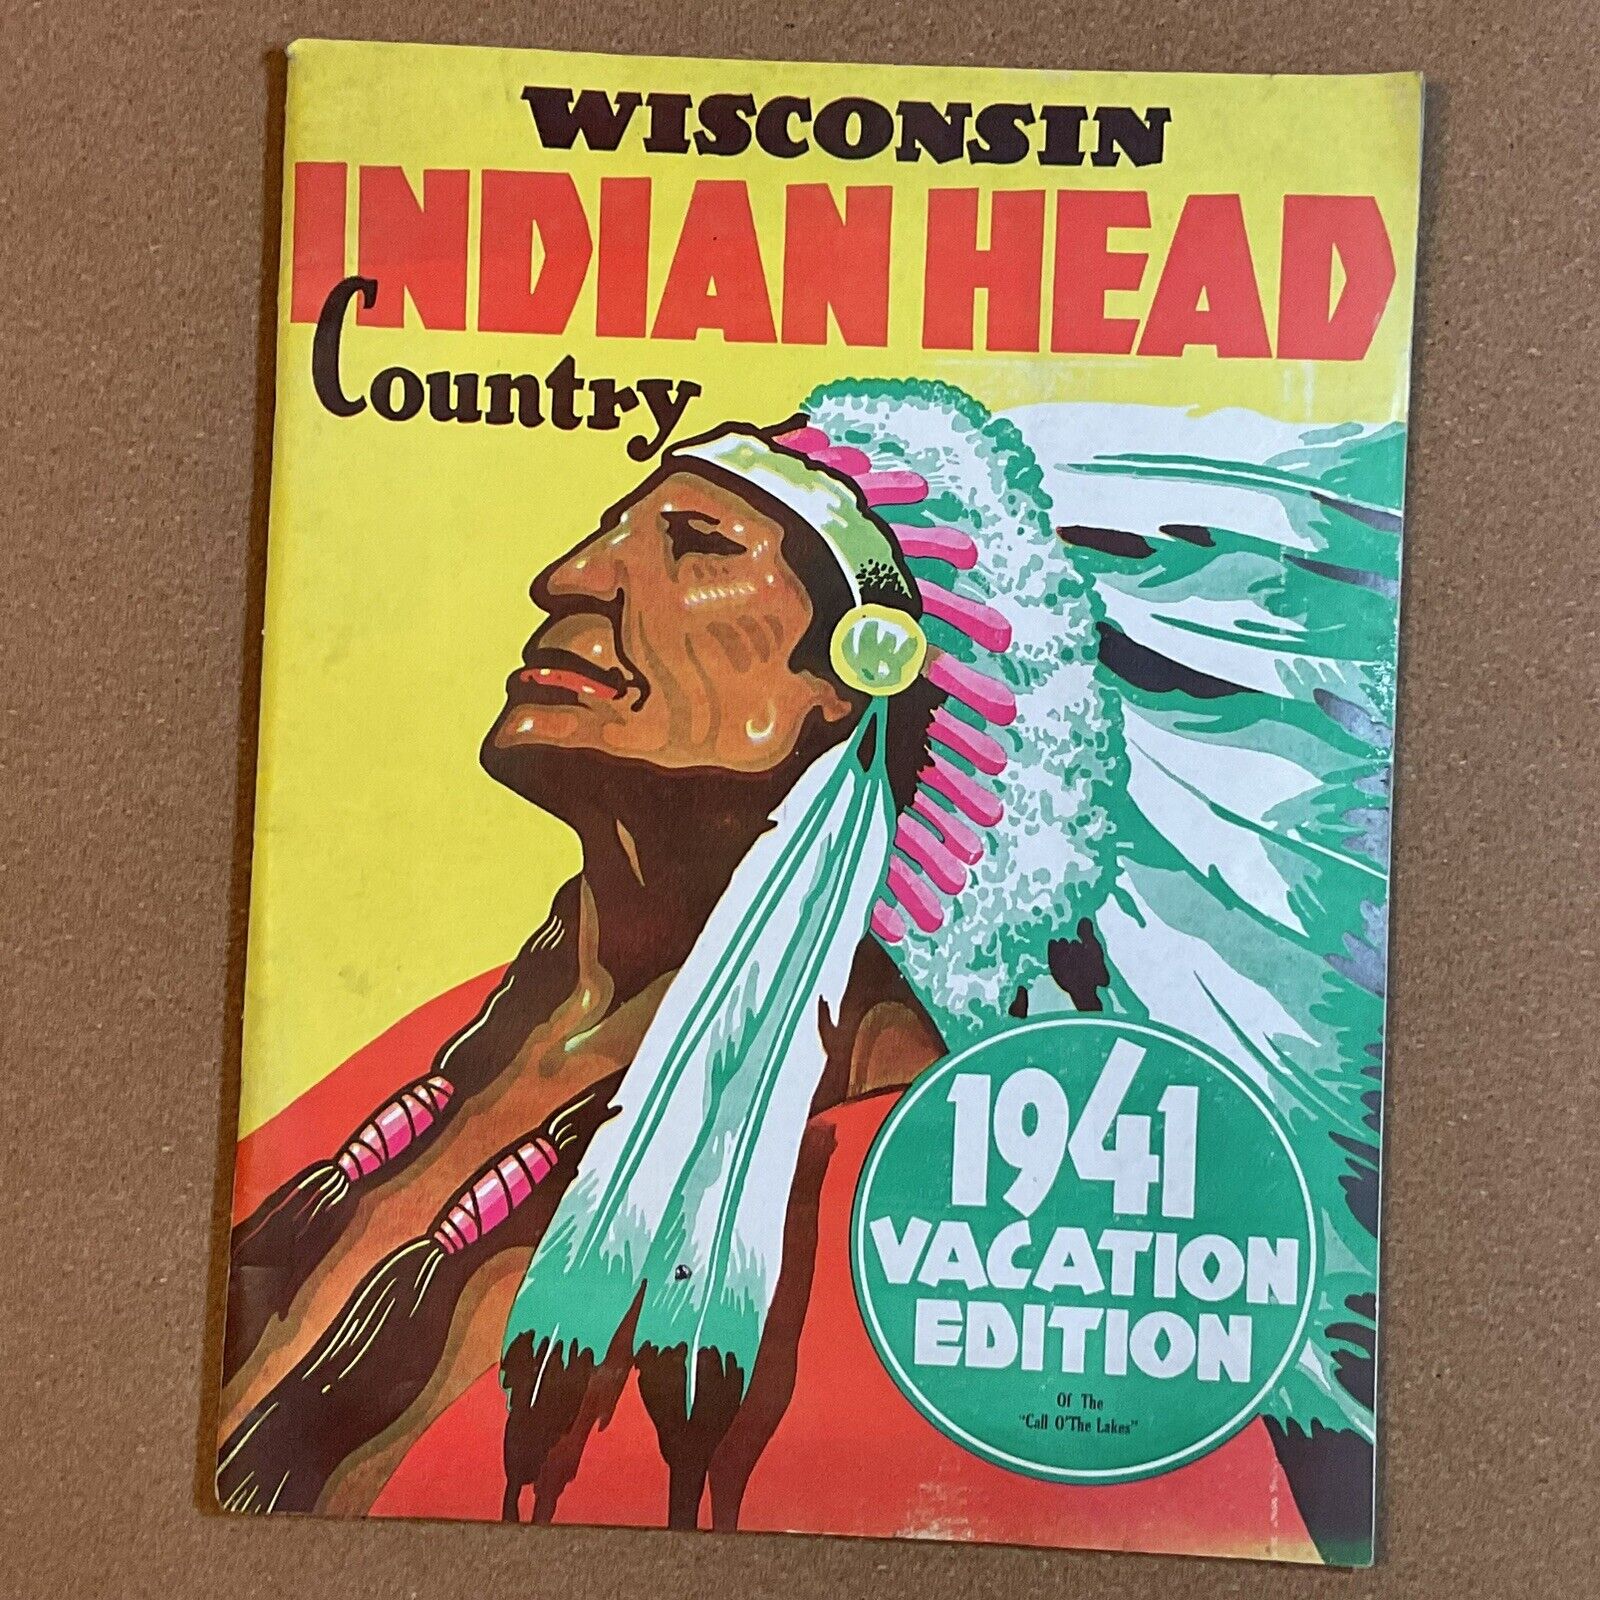 Indian Head Country | Wisconsin 1941 Tourist Booklet | Vtg 1940s Litho Cover